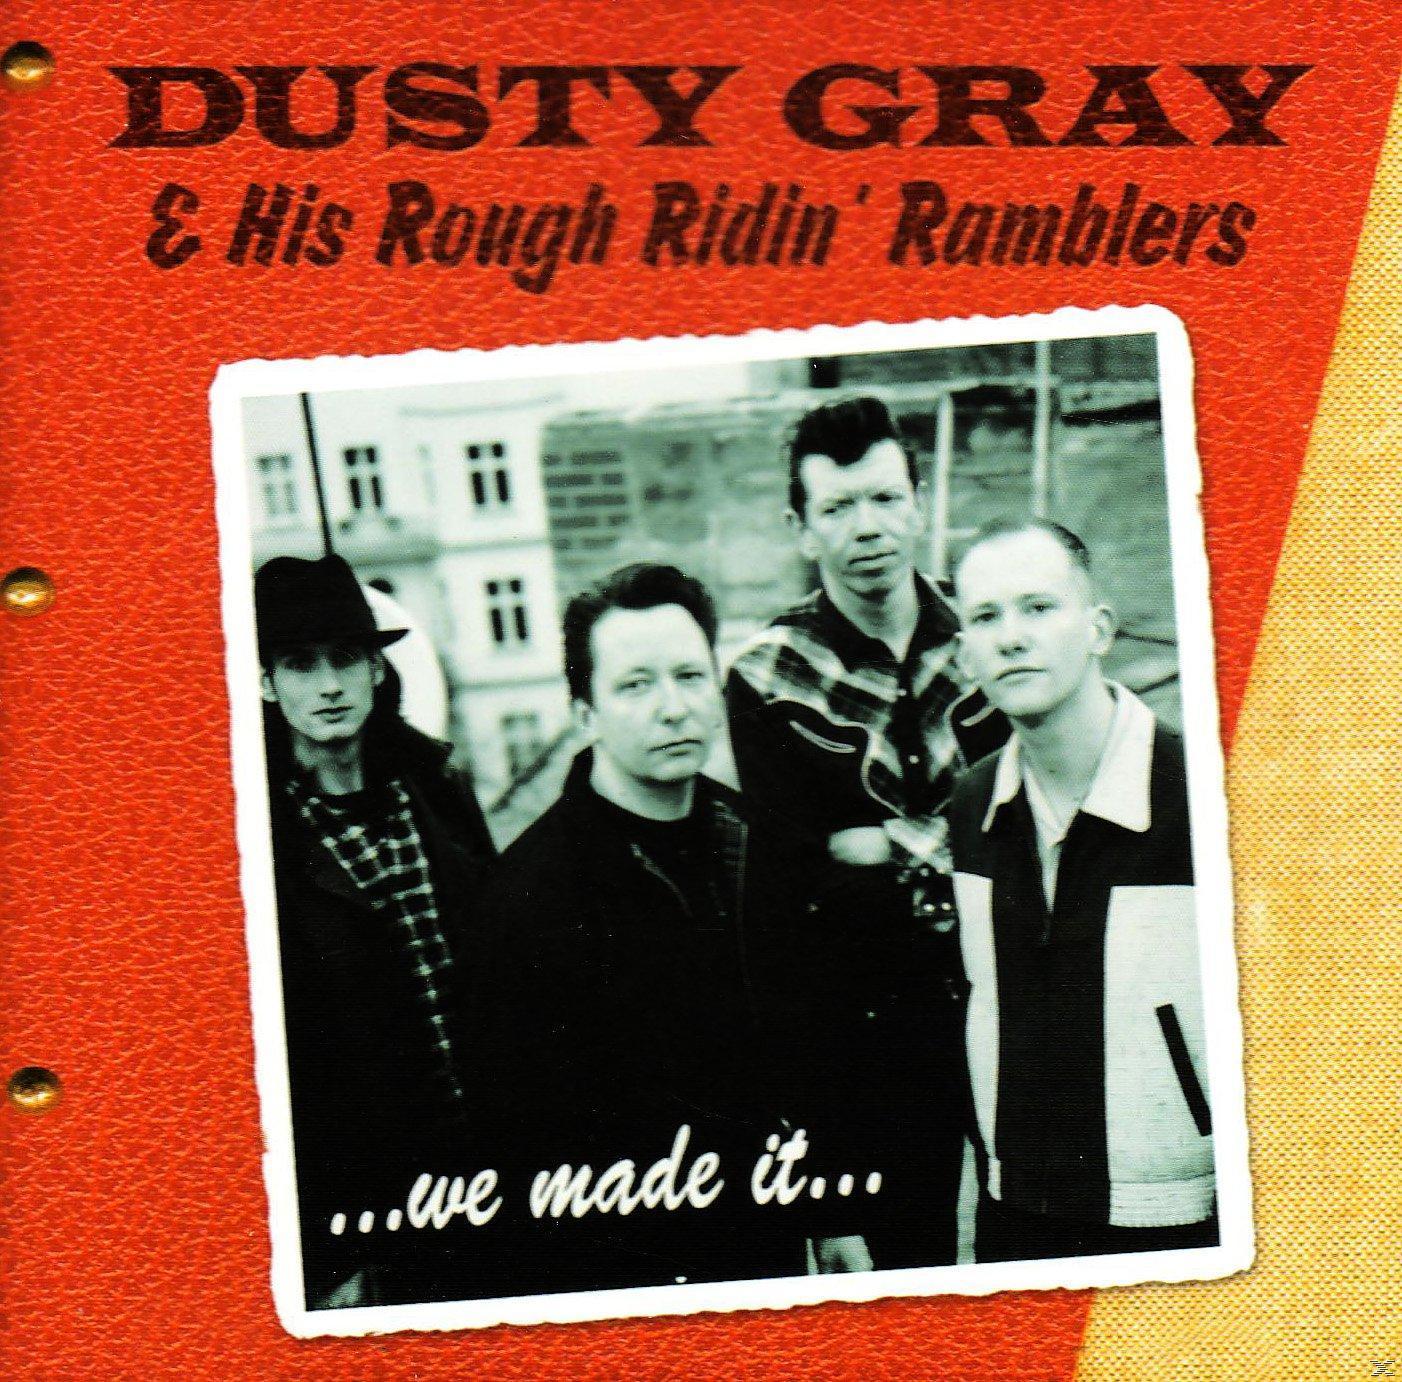 Ridin\' It His We Dusty-gray Rough Made - Ramblers & - (CD)